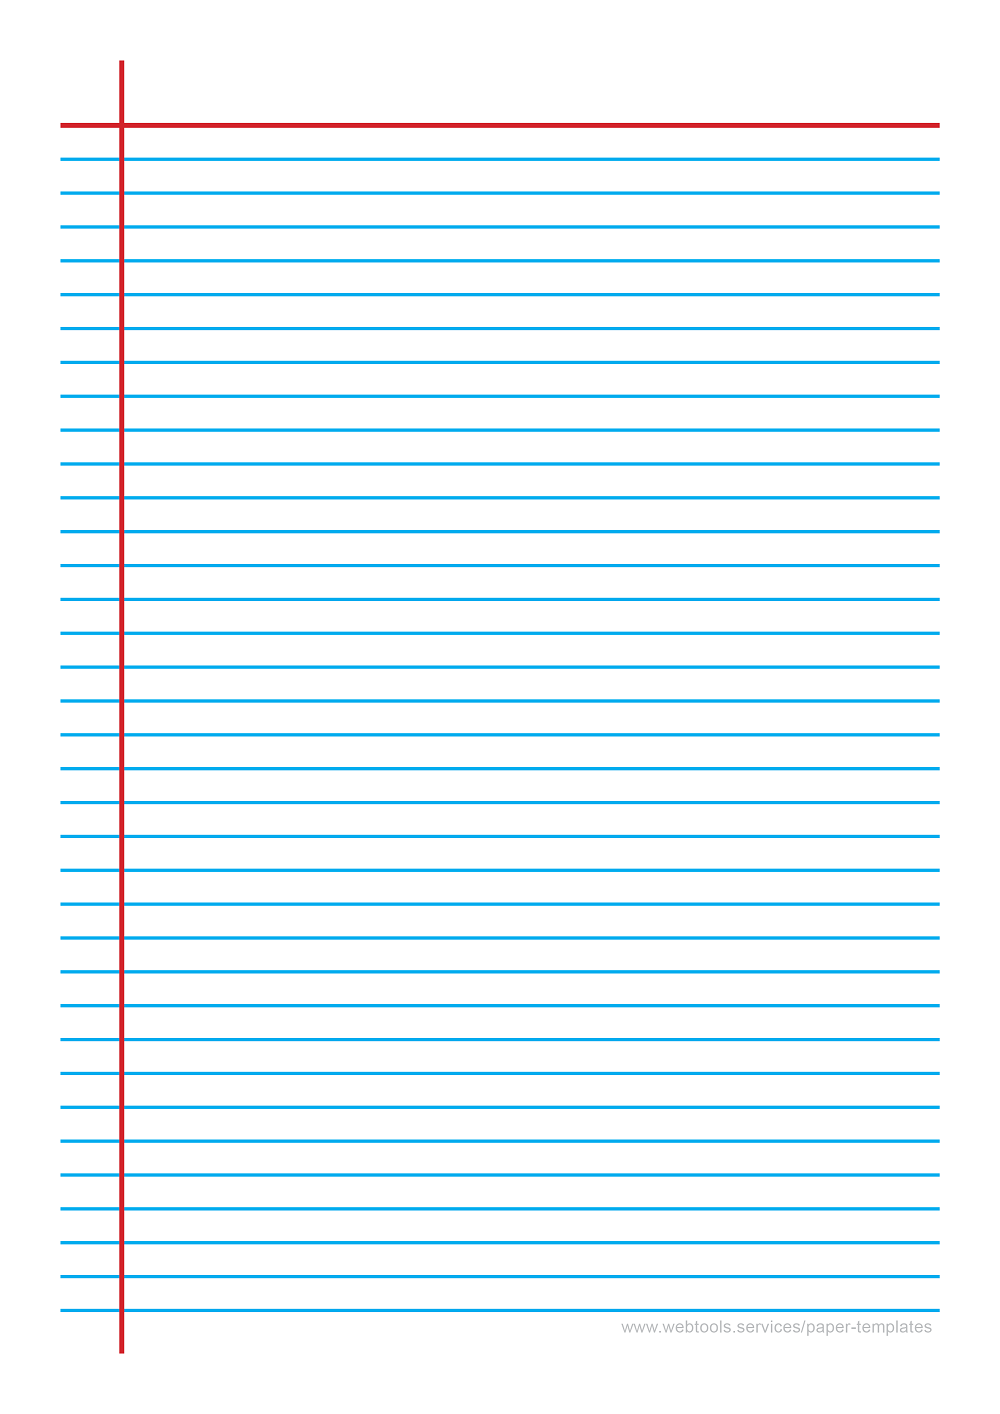 7_1mm Blue Line Ruled Paper With Horizontal And Vertical Margins